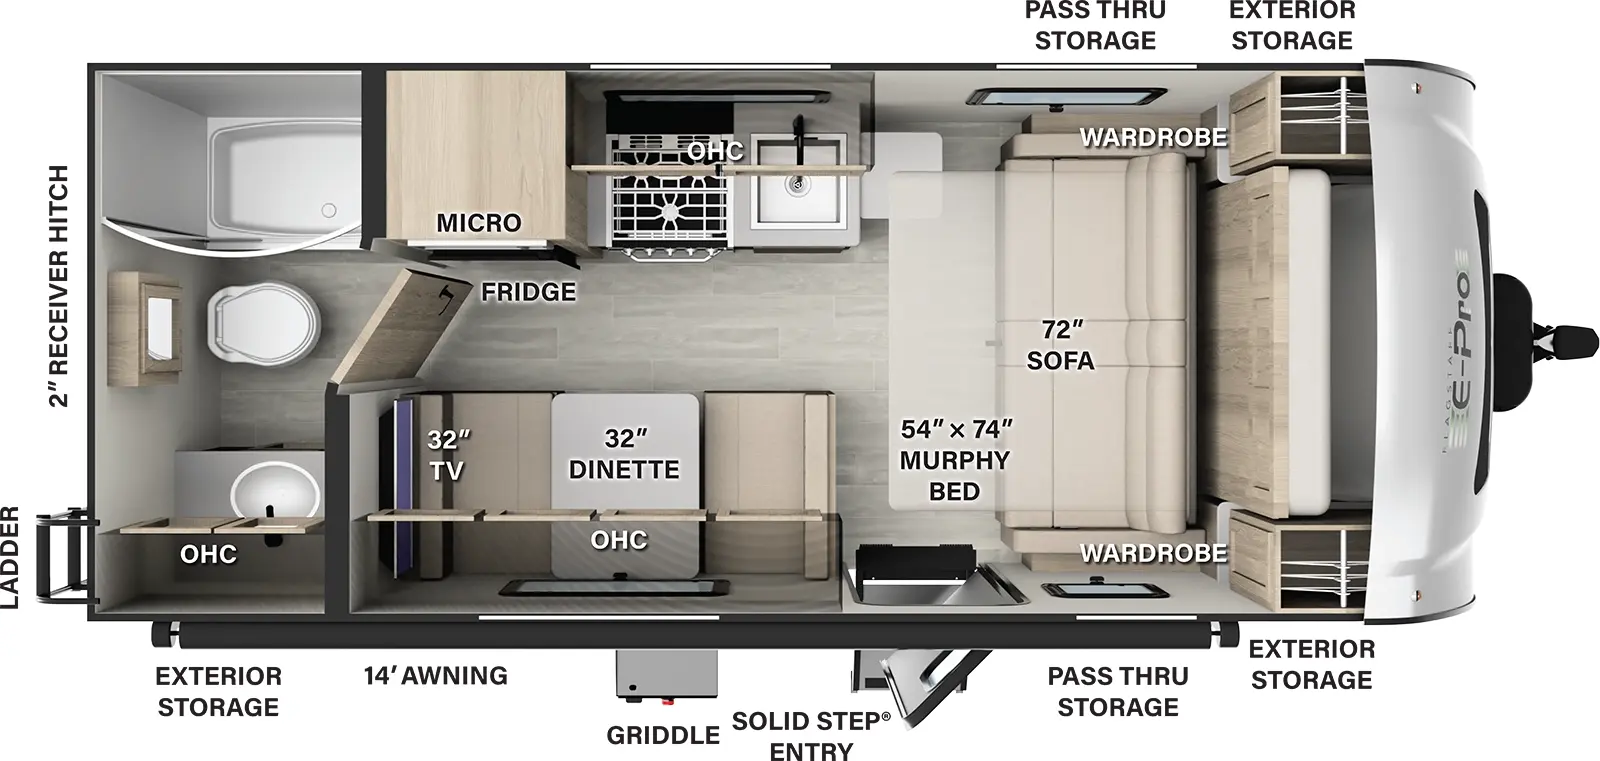 The E19FD has no slide outs and 1 entry door. Exterior features storage, pass thru storage, solid step entry, griddle, 14 foot awning, ladder, and 2 inch receiver hitch. Interior layout front to back: murphy bed/sofa with wardrobes on each side; off-door side kitchen countertop with sink, cooktop, overhead cabinet, microwave and refrigerator; door side dinette with overhead cabinet and TV; rear full bathroom with overhead cabinet.